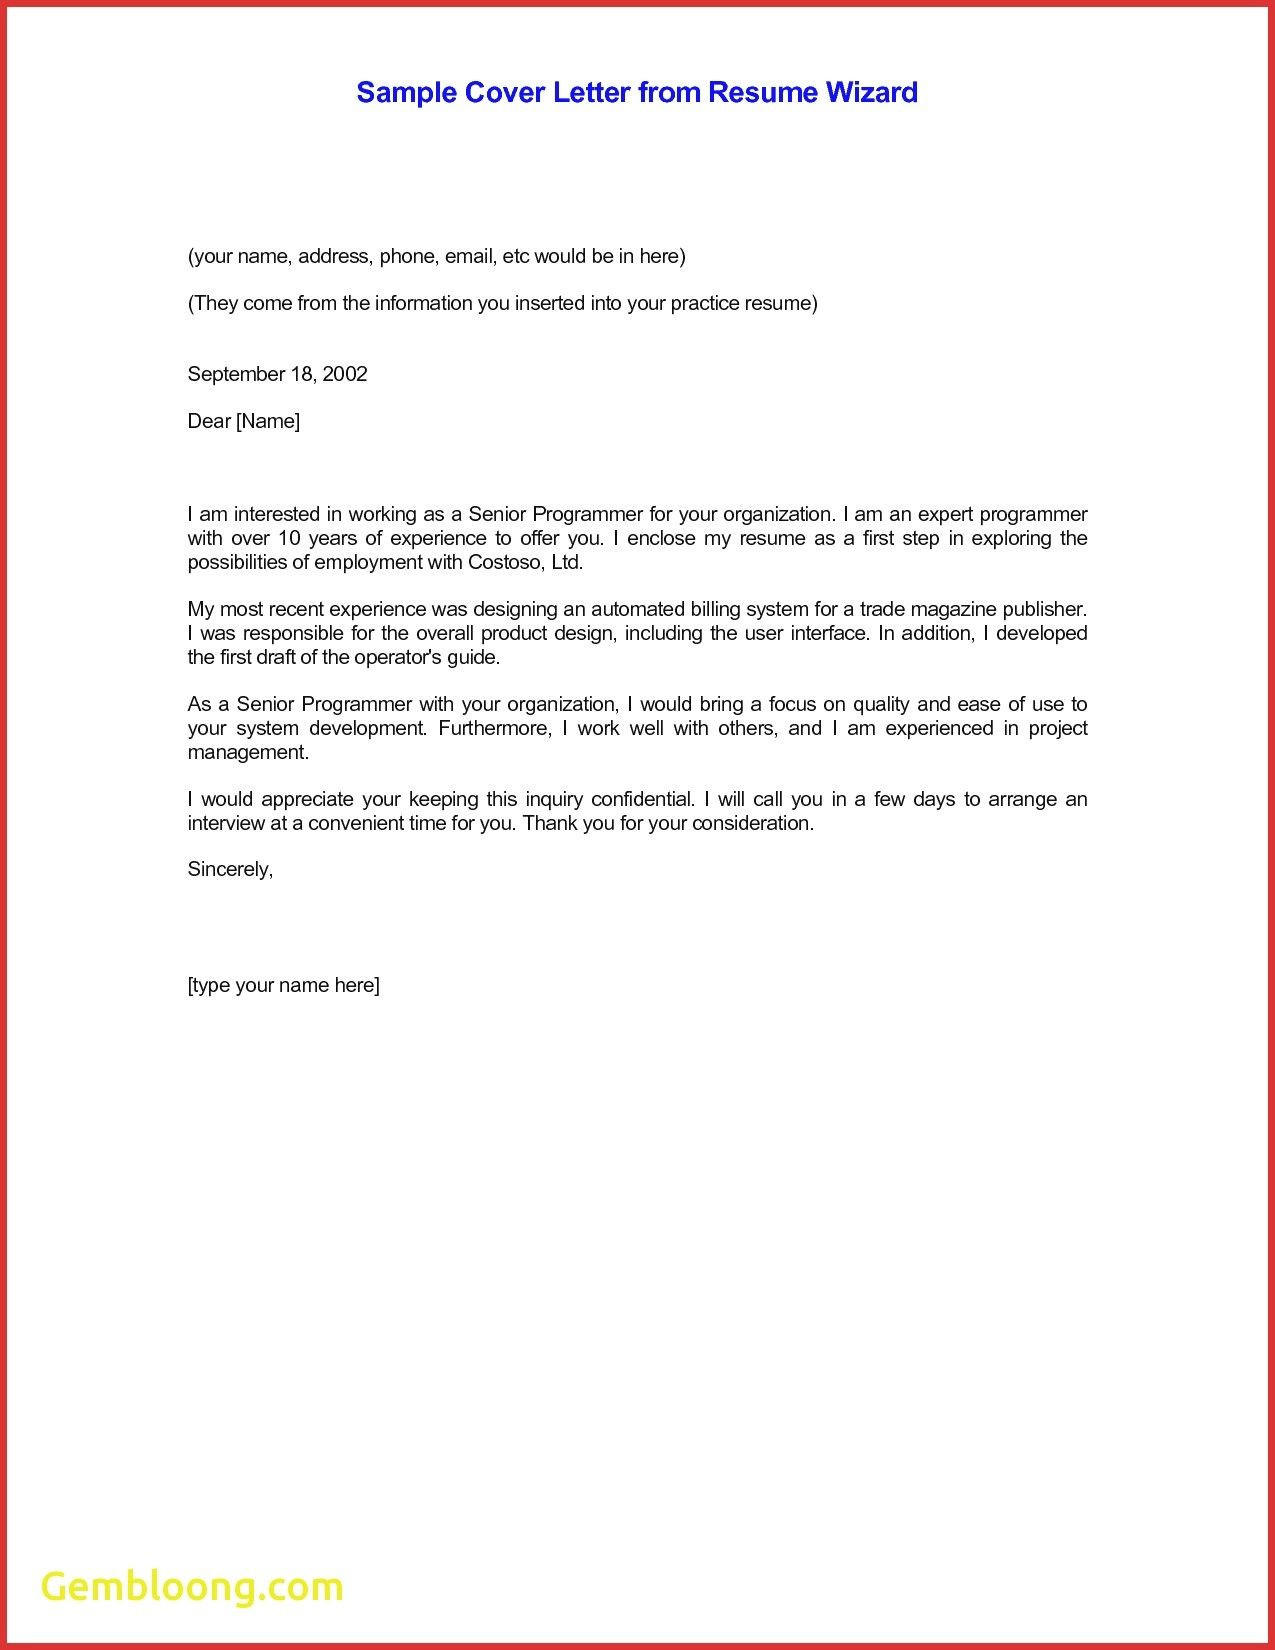 Sample Email to Send Resume and Cover Letter for Job Email Cv Cover Letter Template – Resume format Cover Letter for …